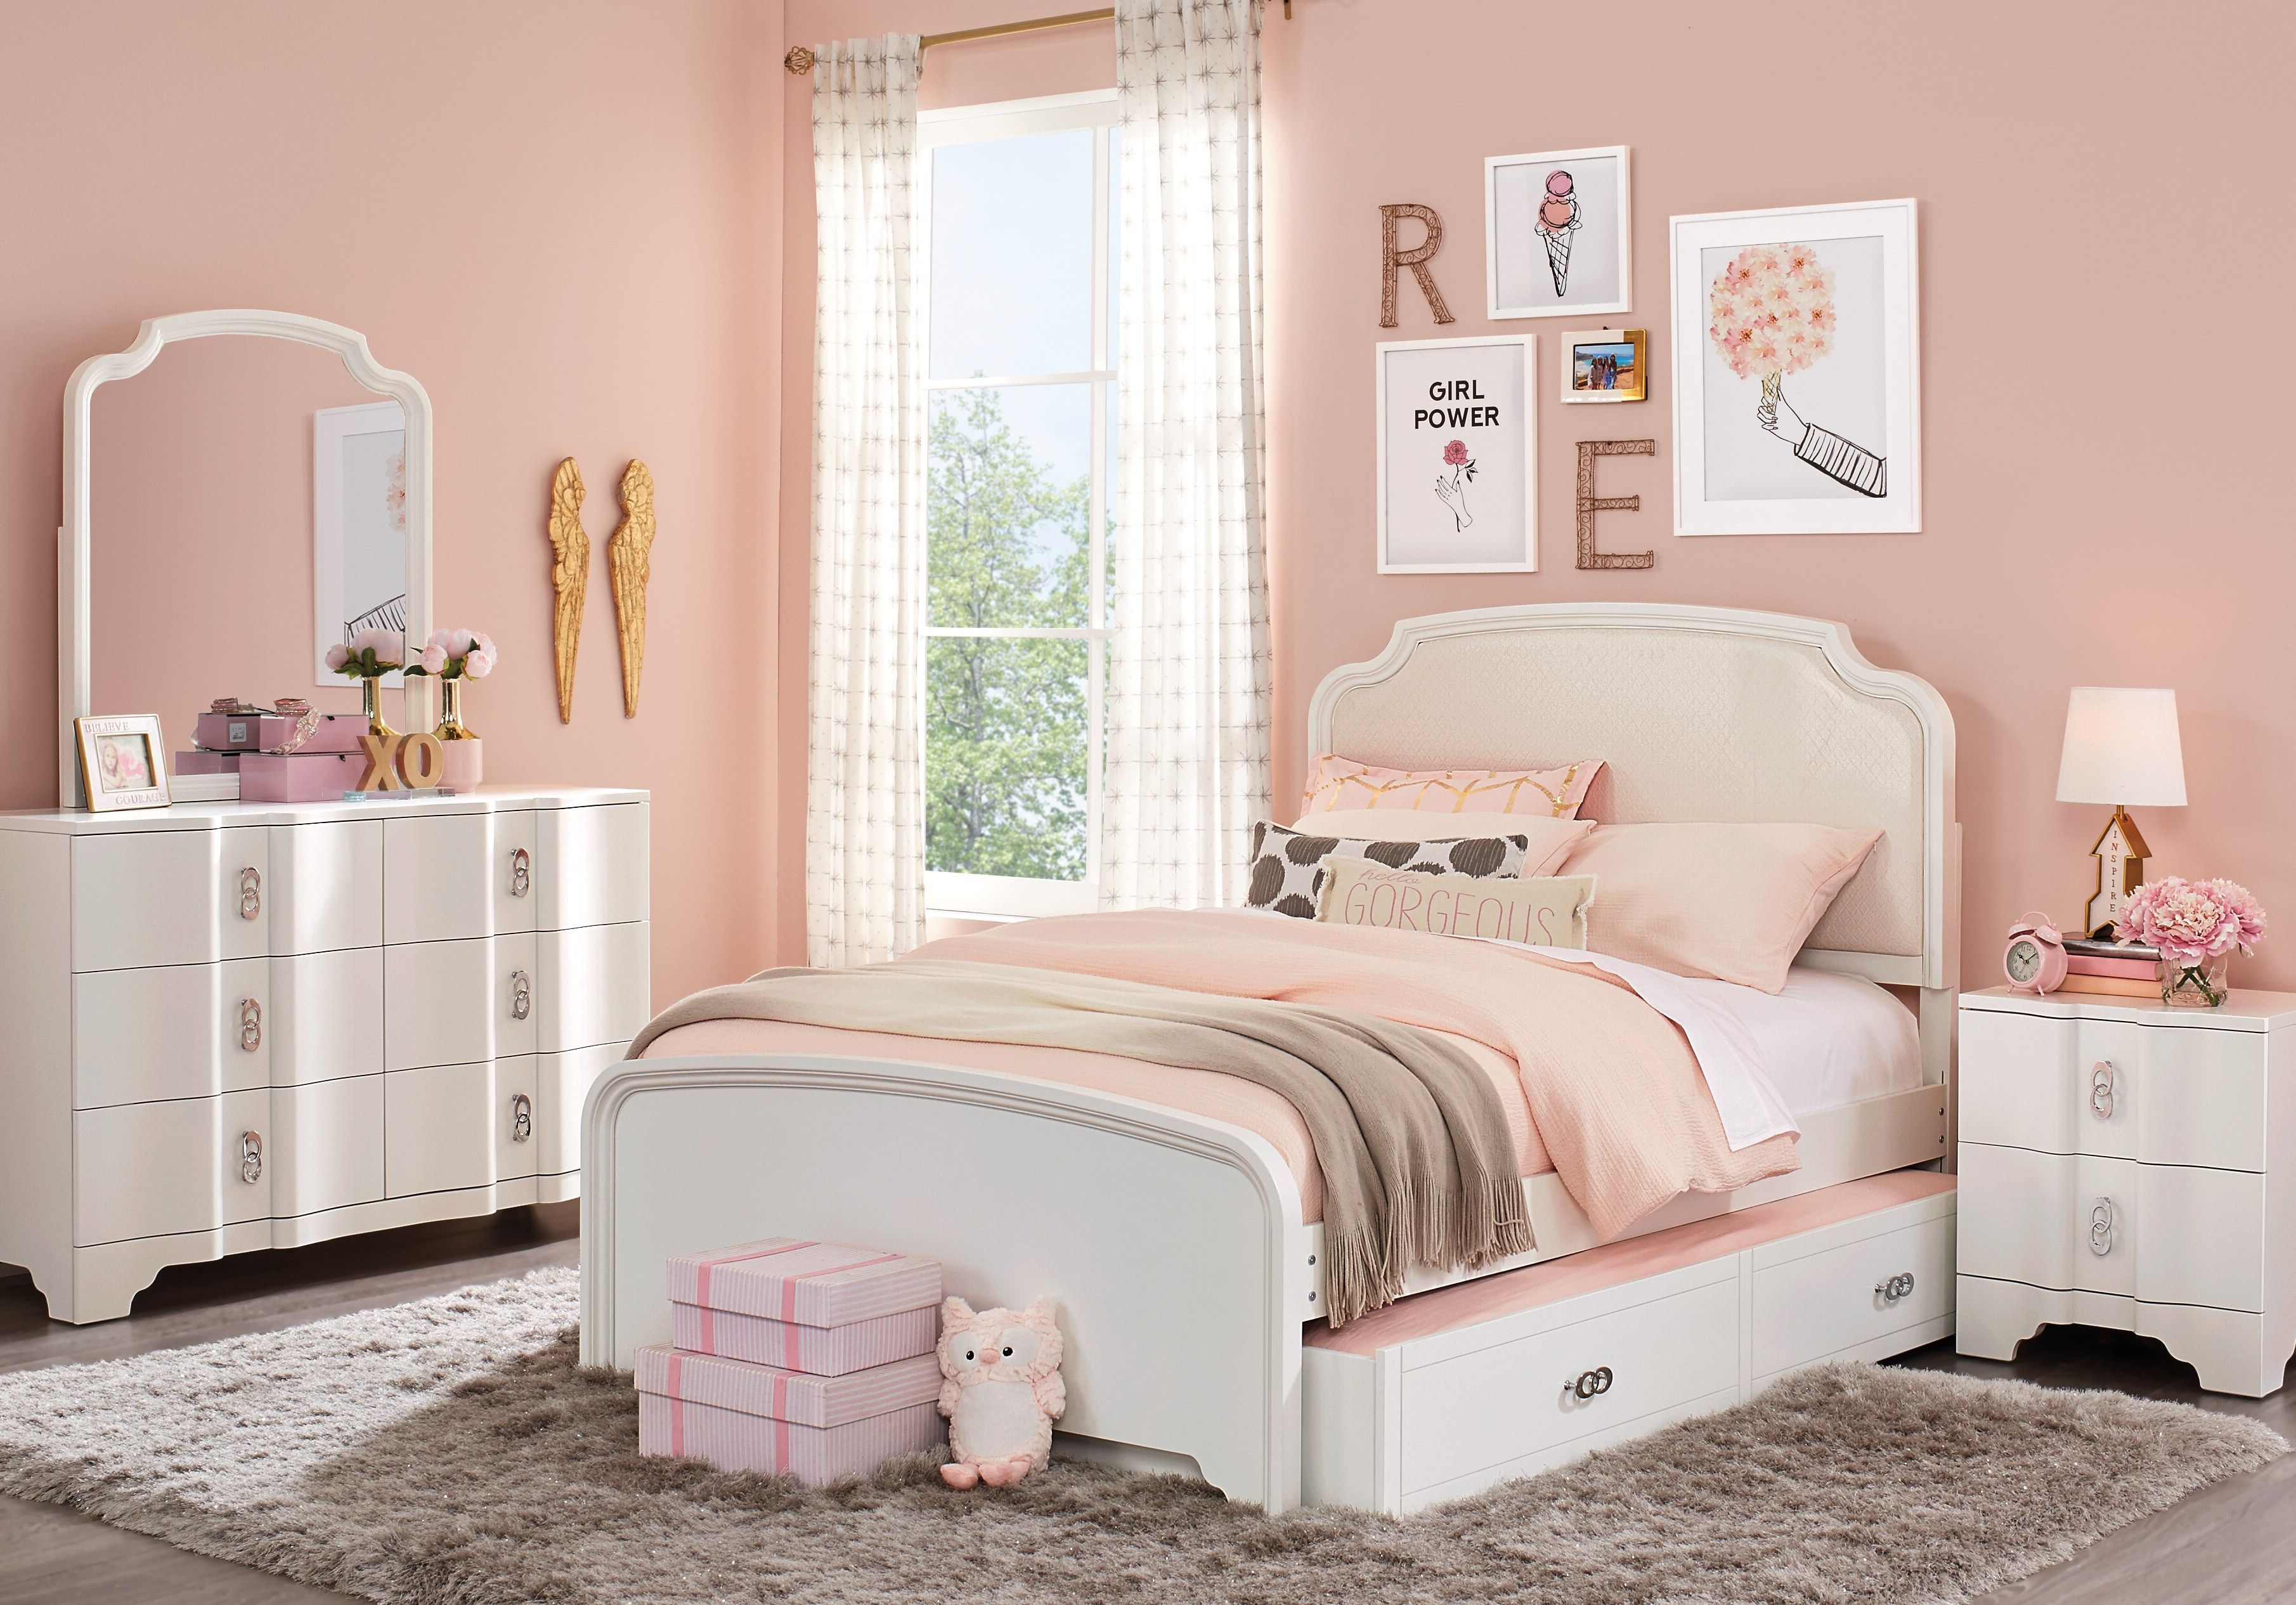 Rylee White 5 Pc Full Upholstered Bedroom Teen Bedroom Sets Colors pertaining to measurements 3621 X 2531